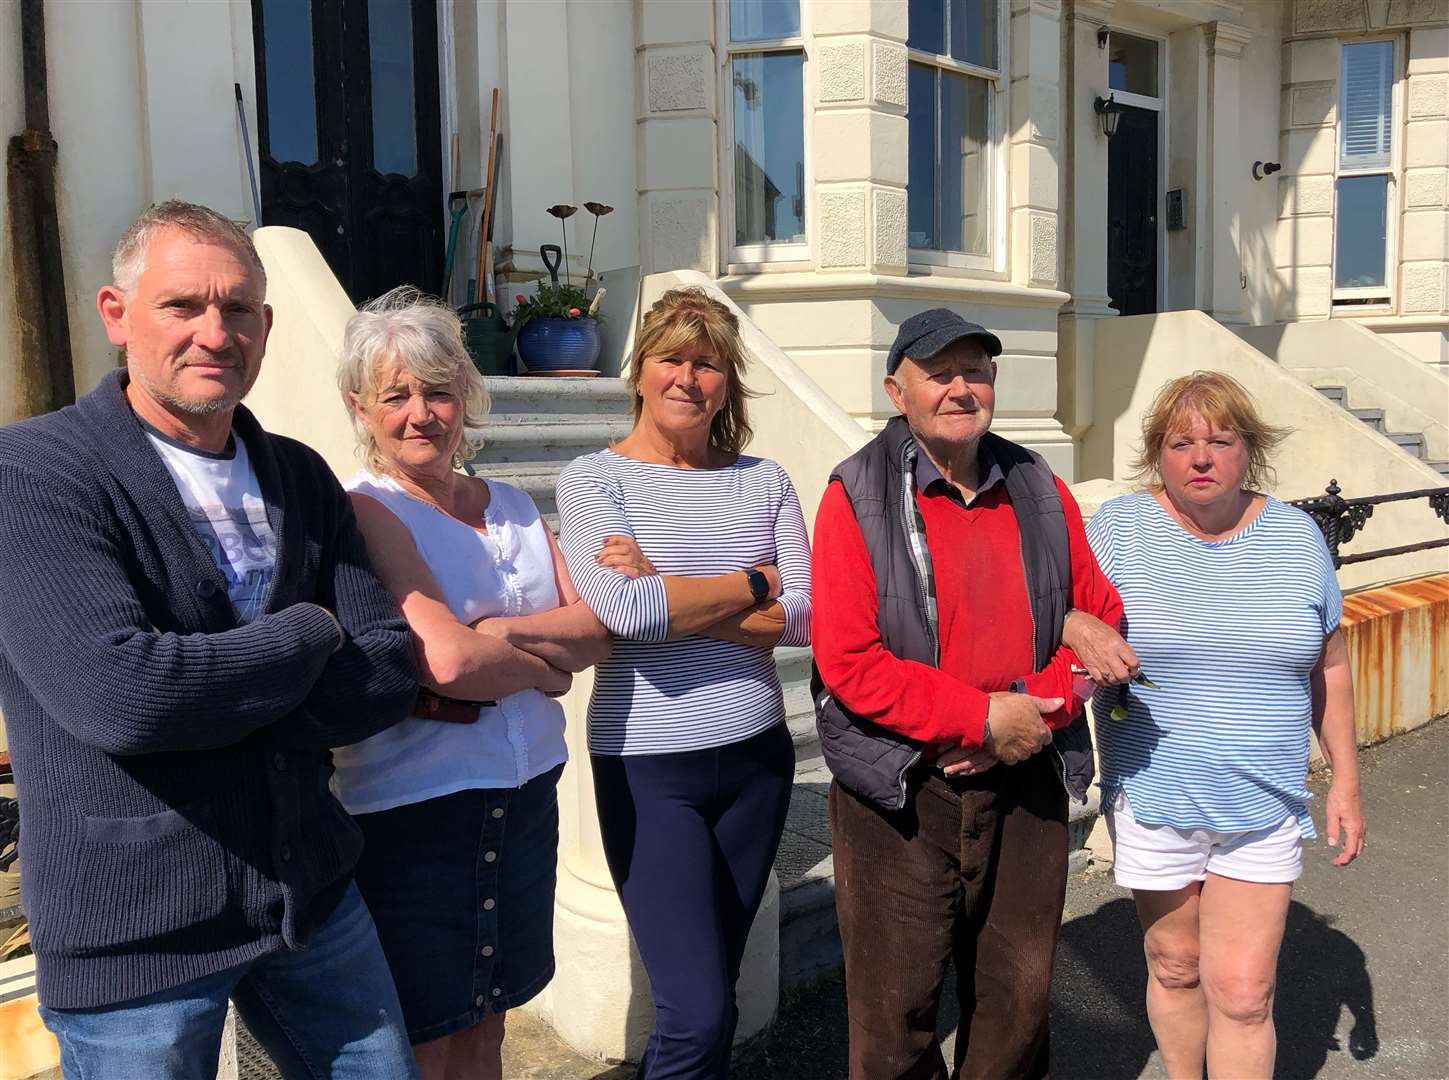 (L to R) Phil Jones, Judi Varona, Kelly Scott, Richard Highwood and Katrina Harris are among the leaseholders in Marine Crescent, Folkestone, being told to pay £11,000 each for repairs